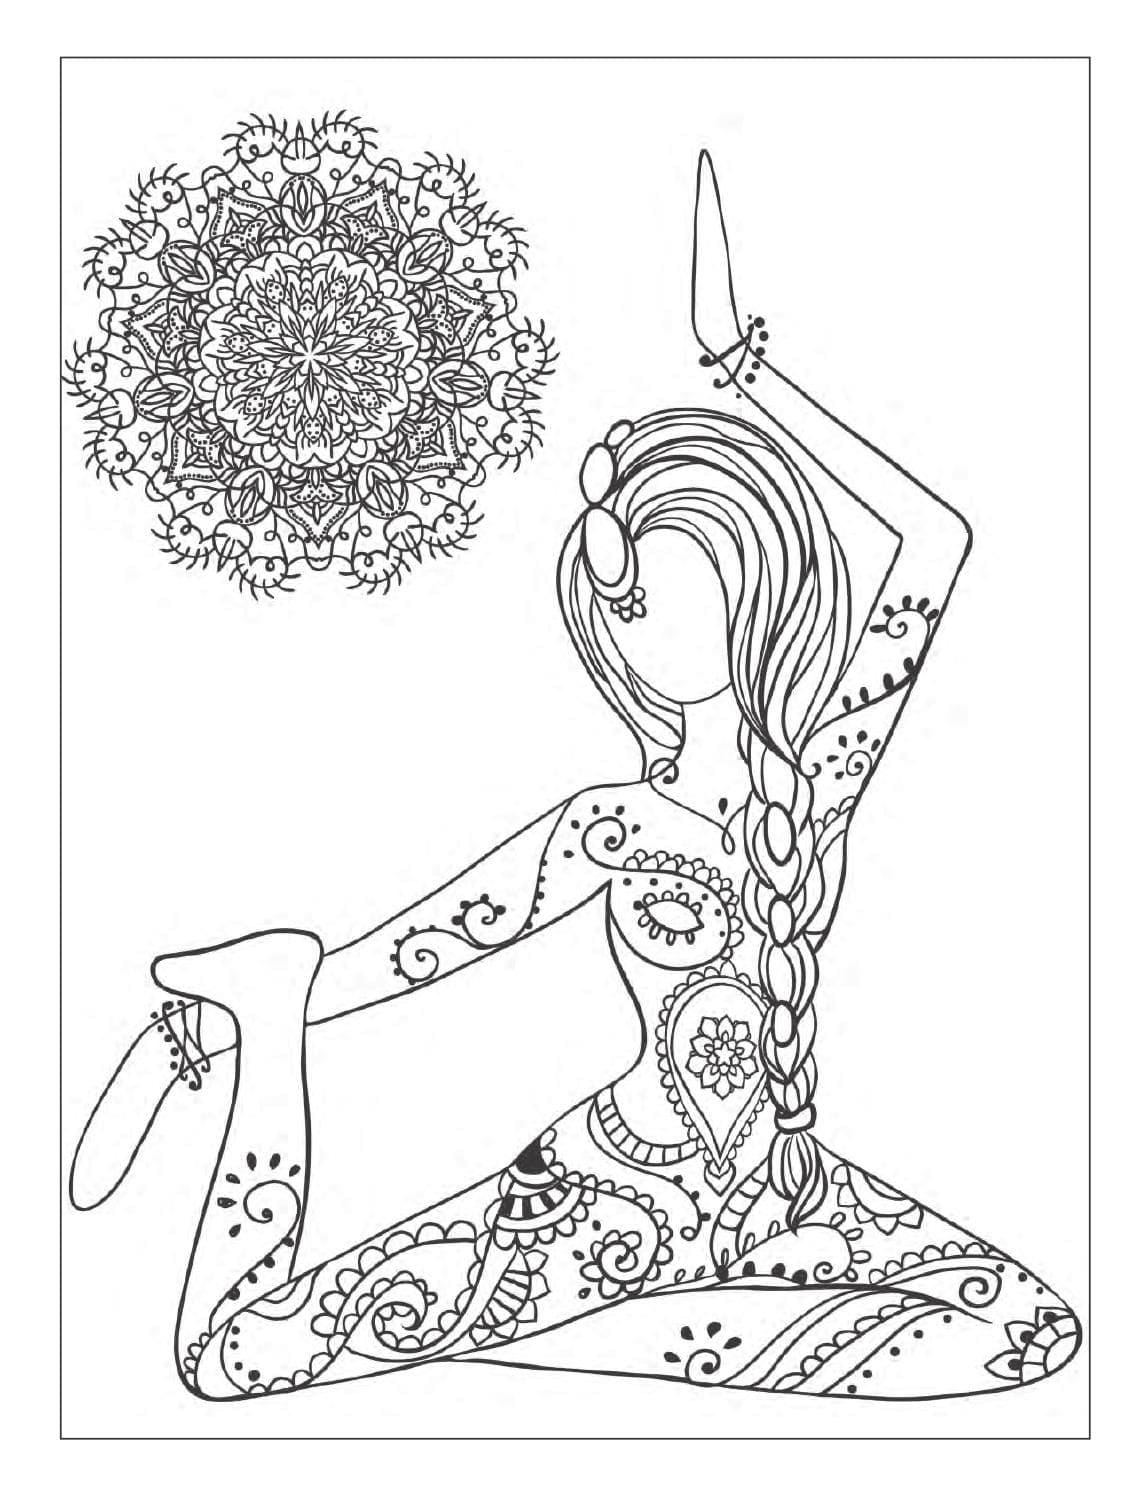 Yoga Meditation Cute For Kids Coloring Page